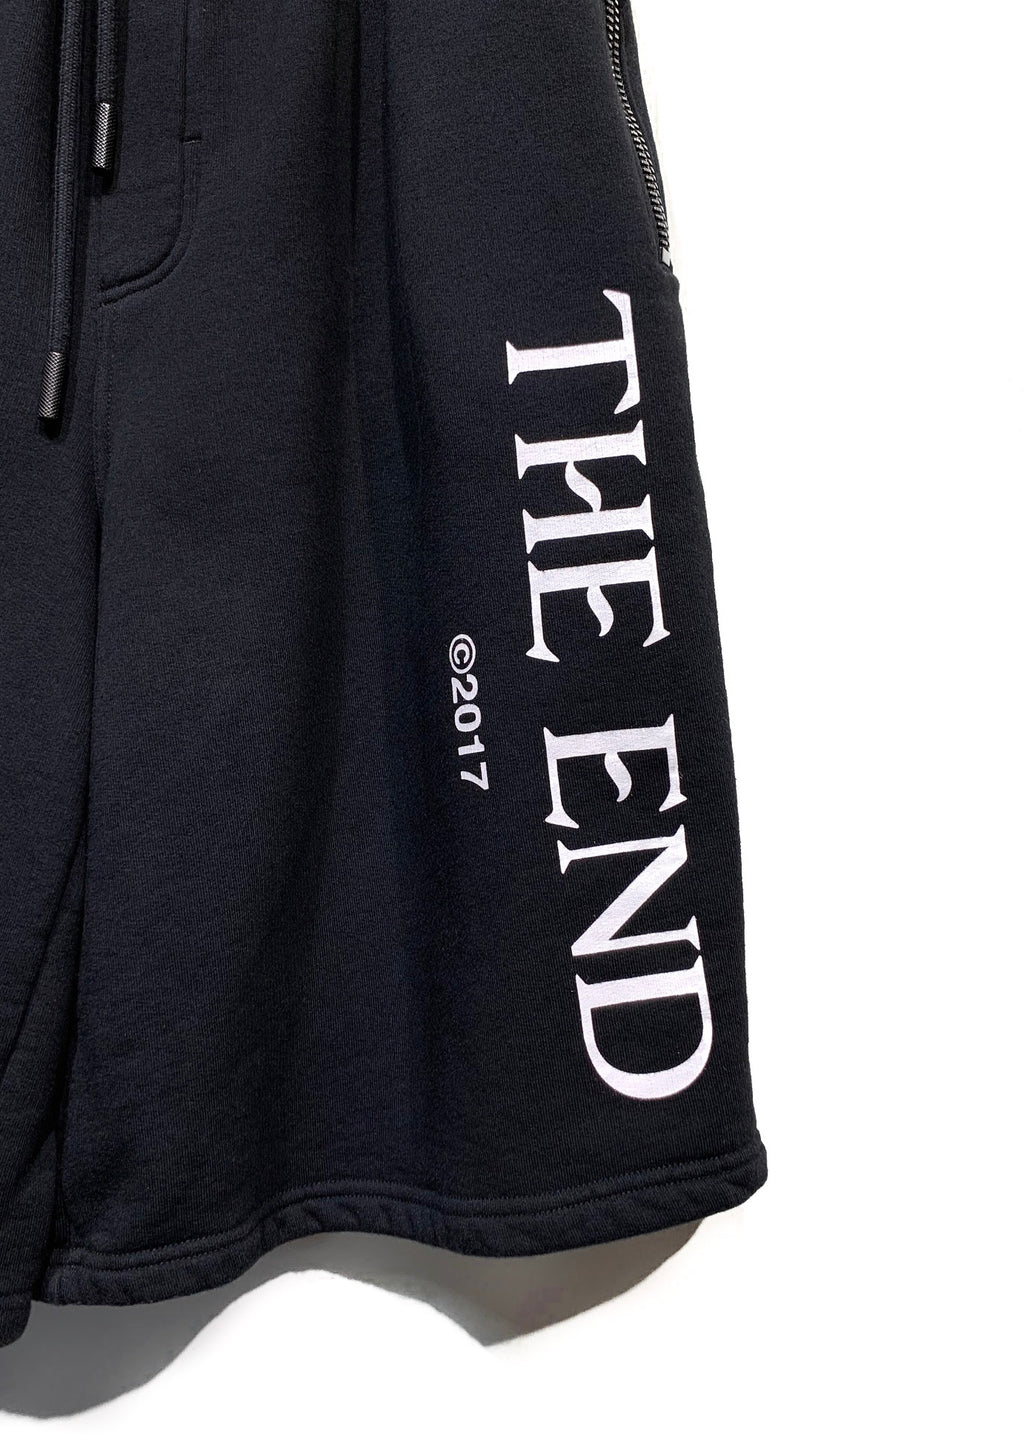 Off-White Baggy "The End" Printed Sweatshorts